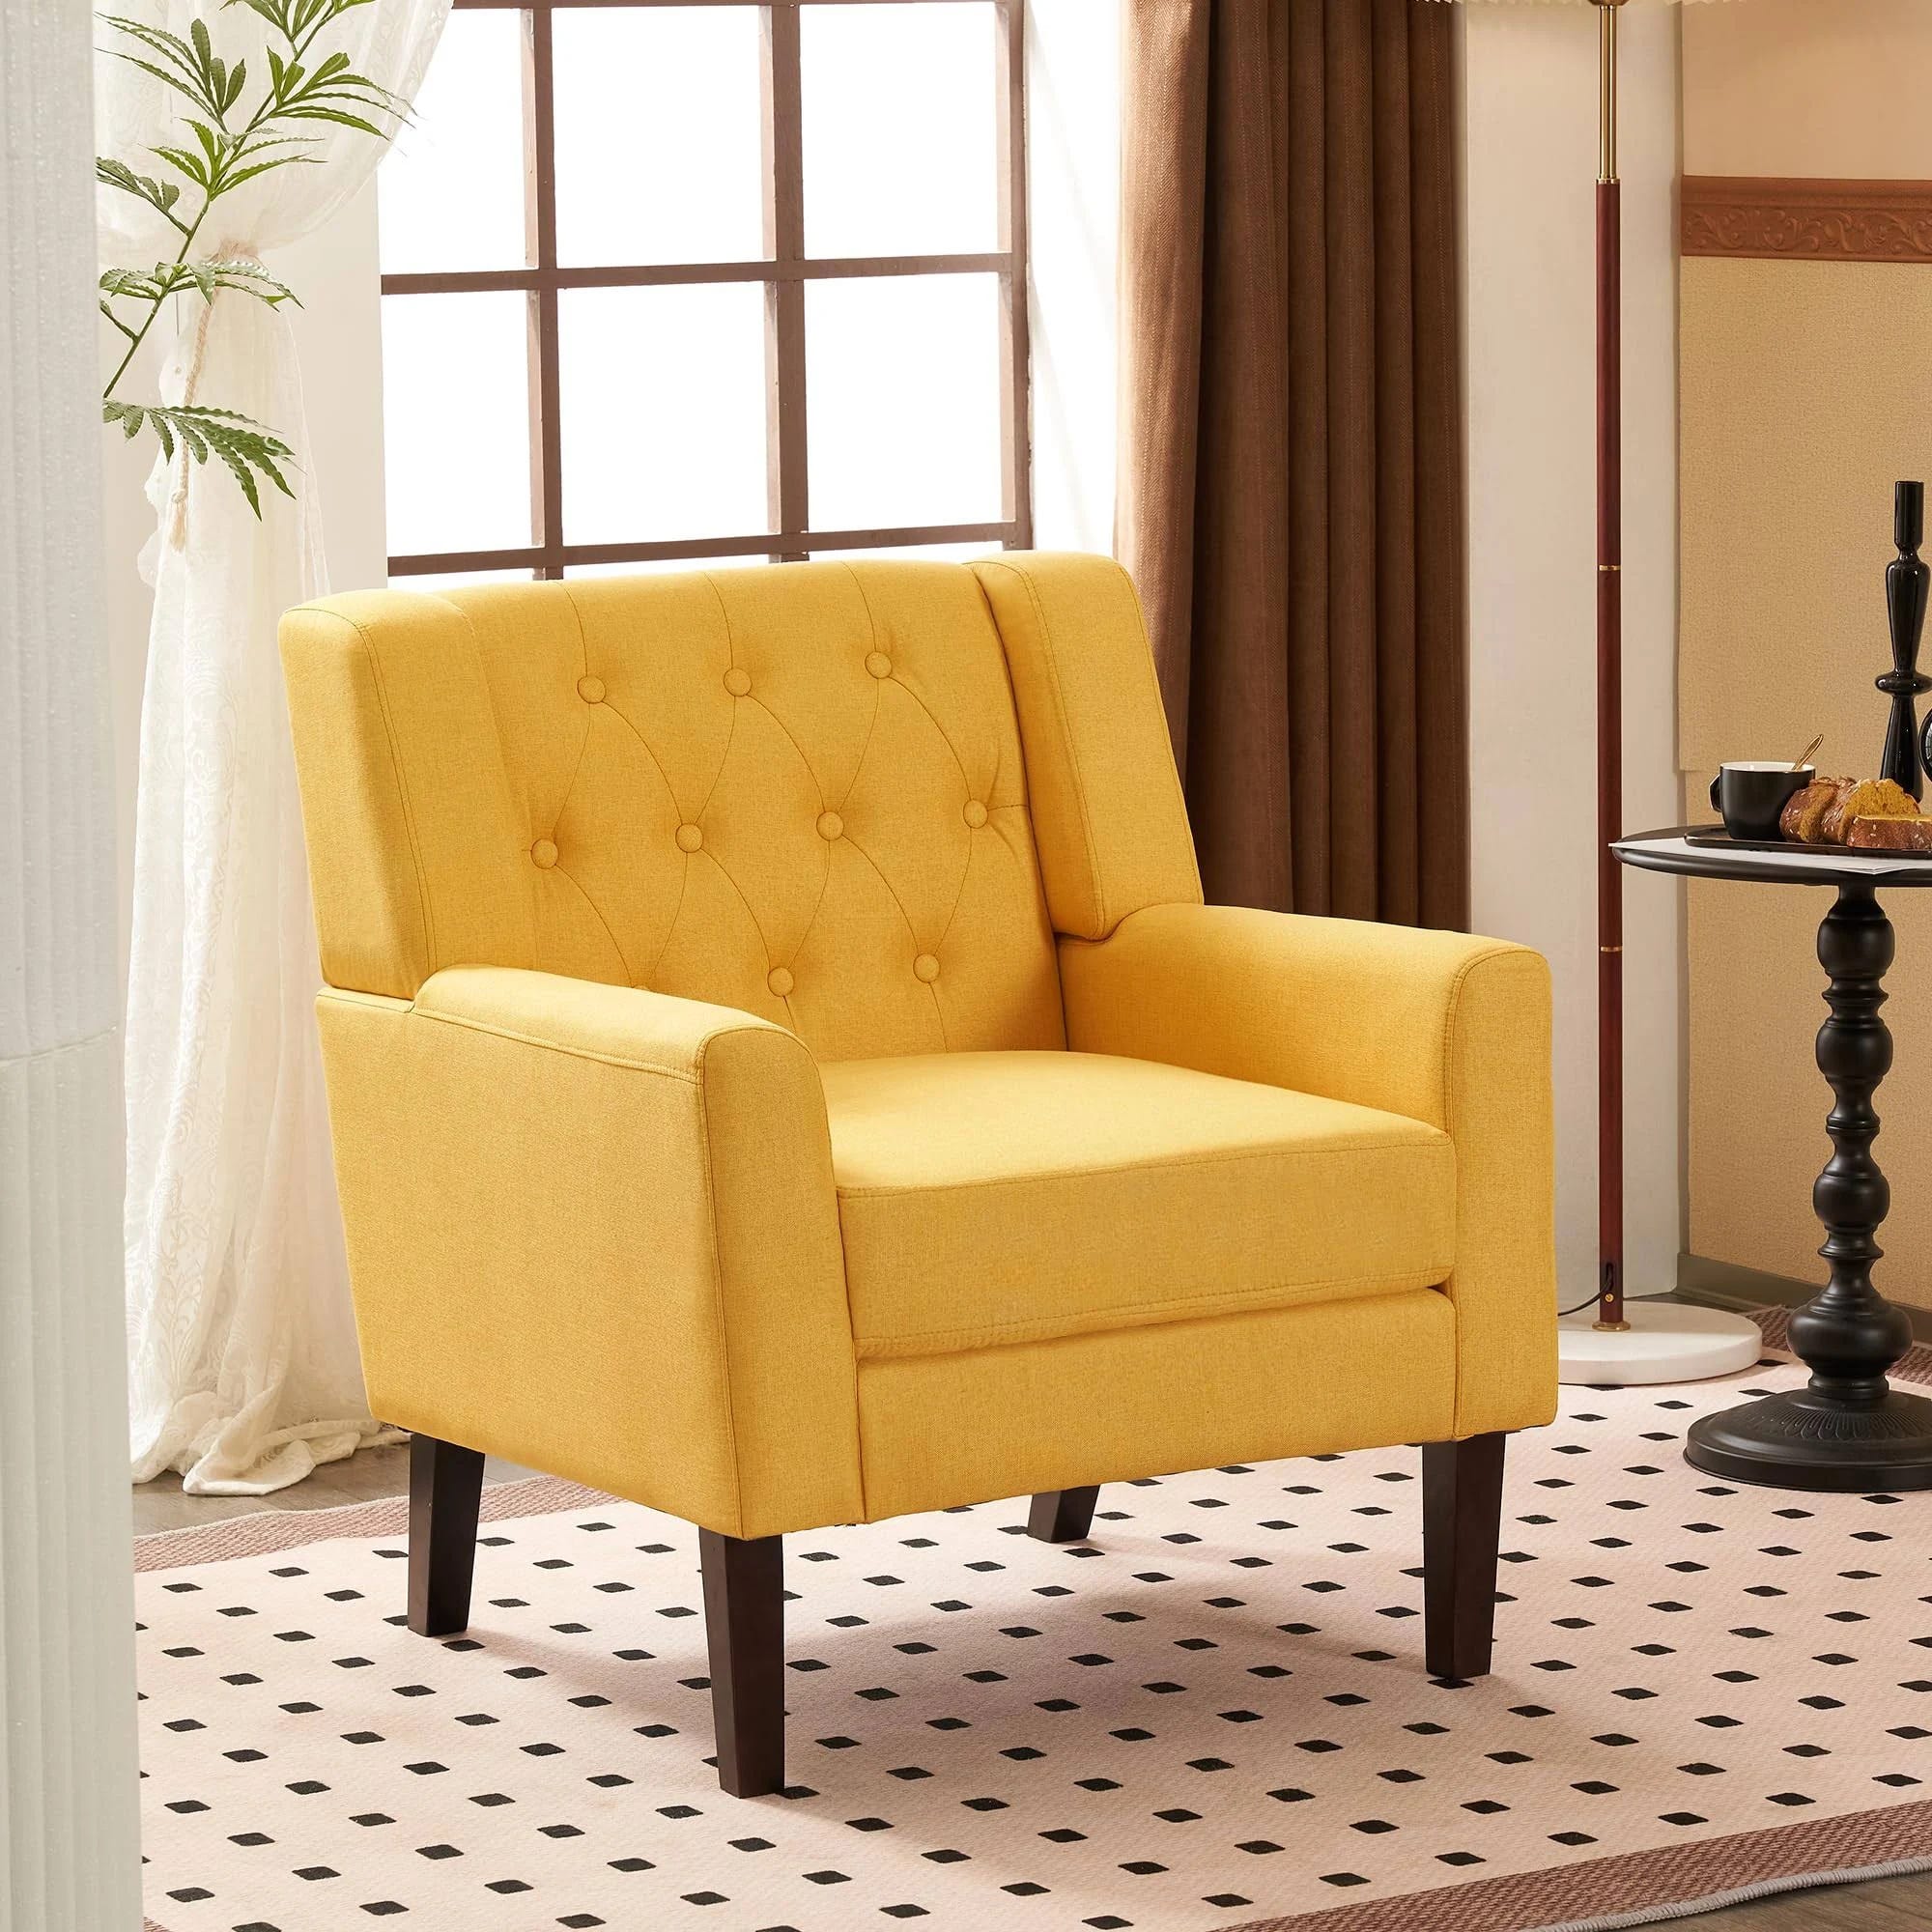 Comfortable Fahomiss Linen Accent Chair for Small Spaces | Image